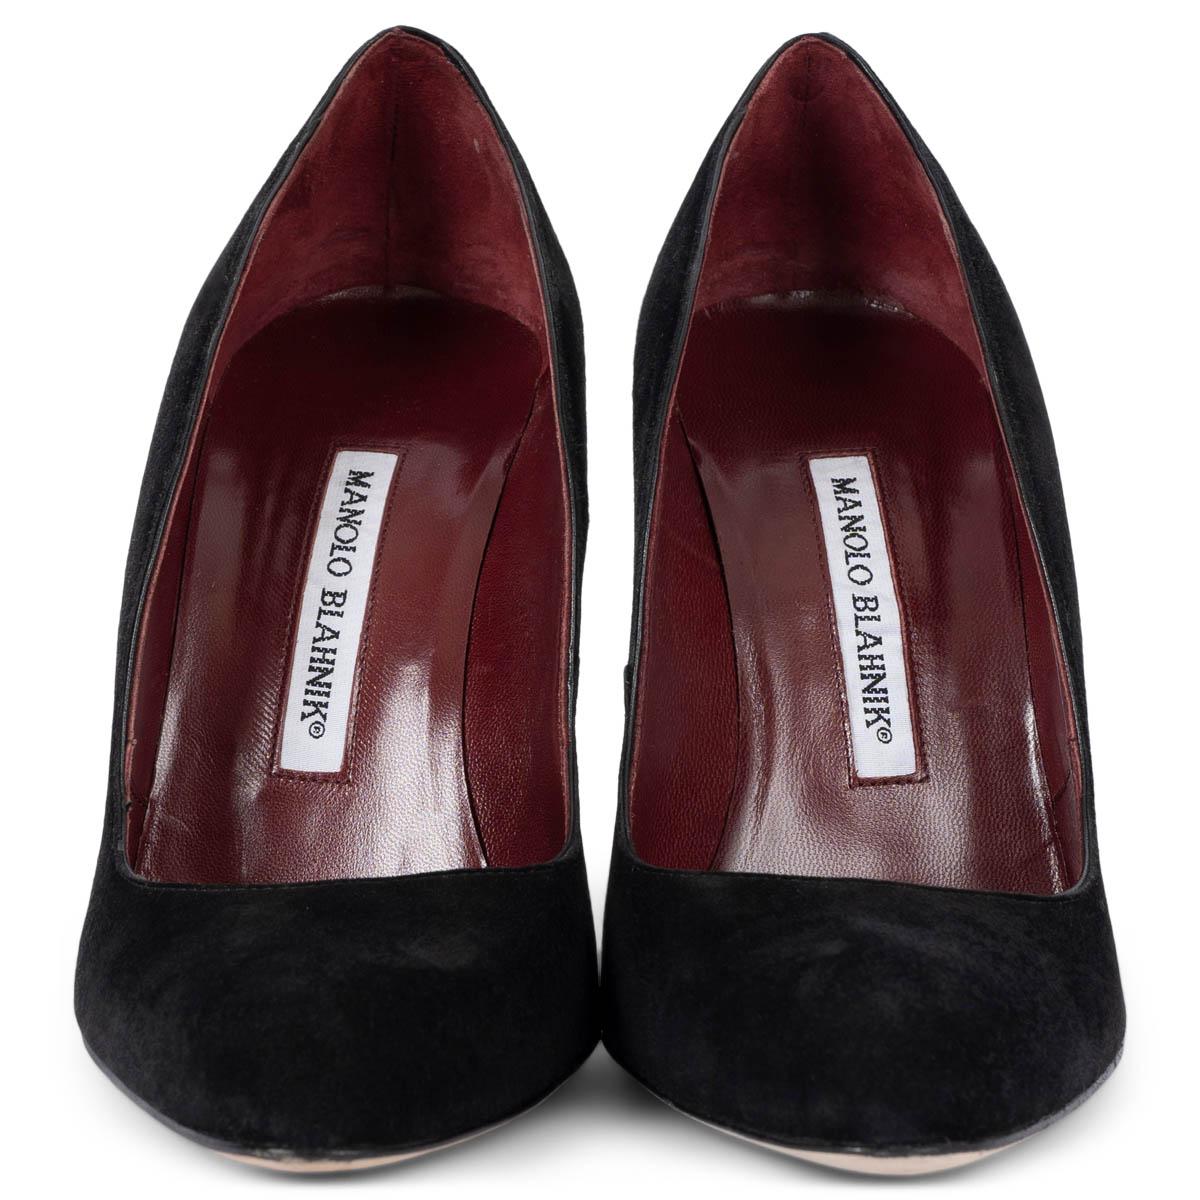 100% authentic Manolo Blahnik round-toe pumps in black suede. Have been worn and are in excellent condition. 

Measurements
Imprinted Size	38
Shoe Size	38
Inside Sole	25cm (9.8in)
Width	7.5cm (2.9in)
Heel	11cm (4.3in)

All our listings include only